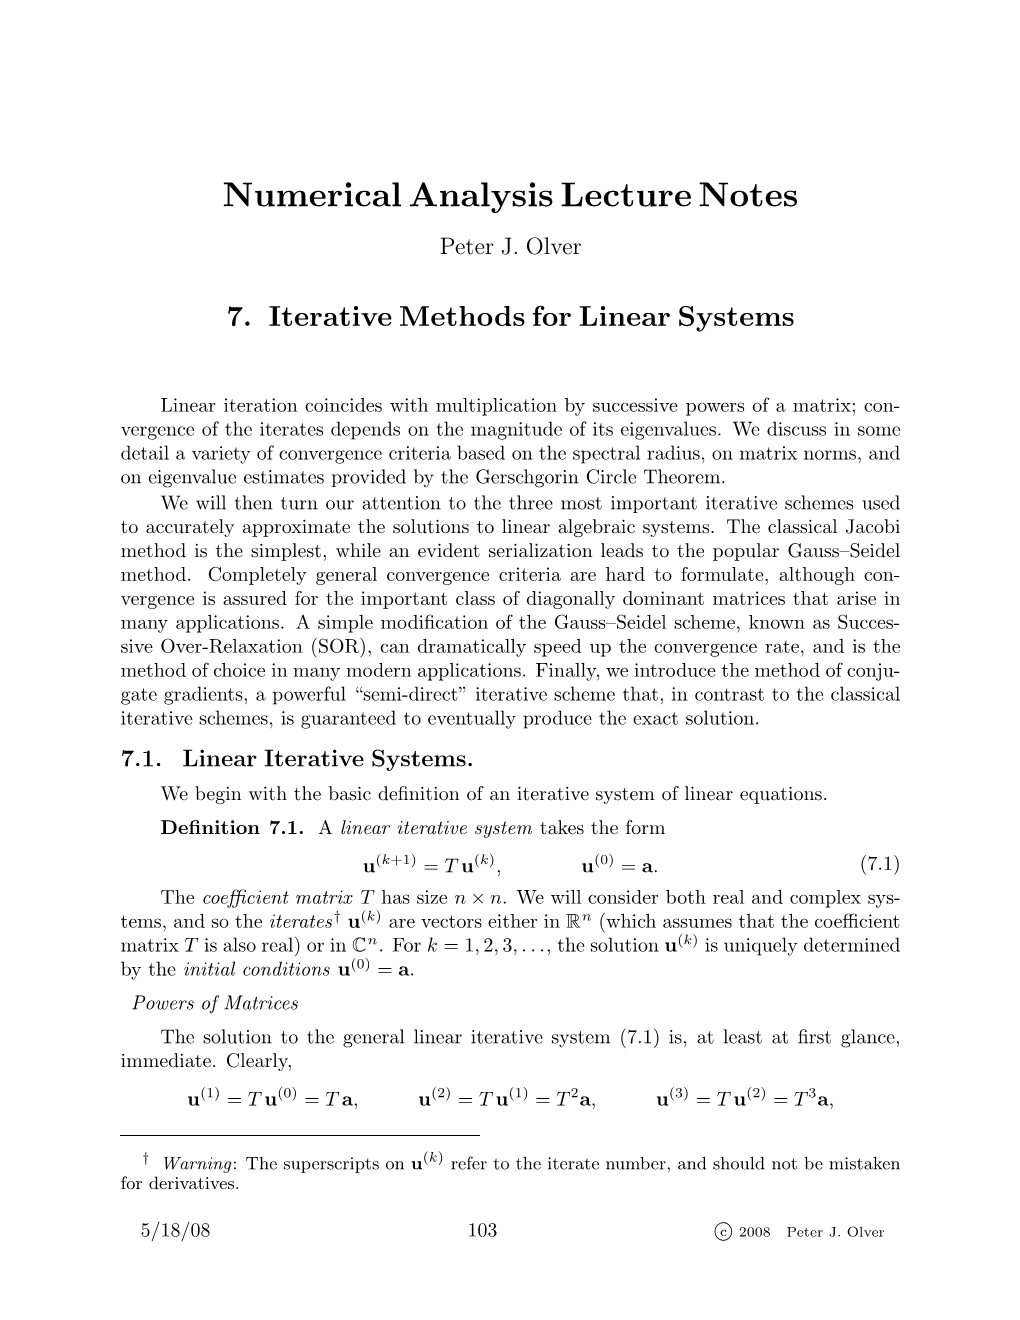 Numerical Analysis Lecture Notes Peter J